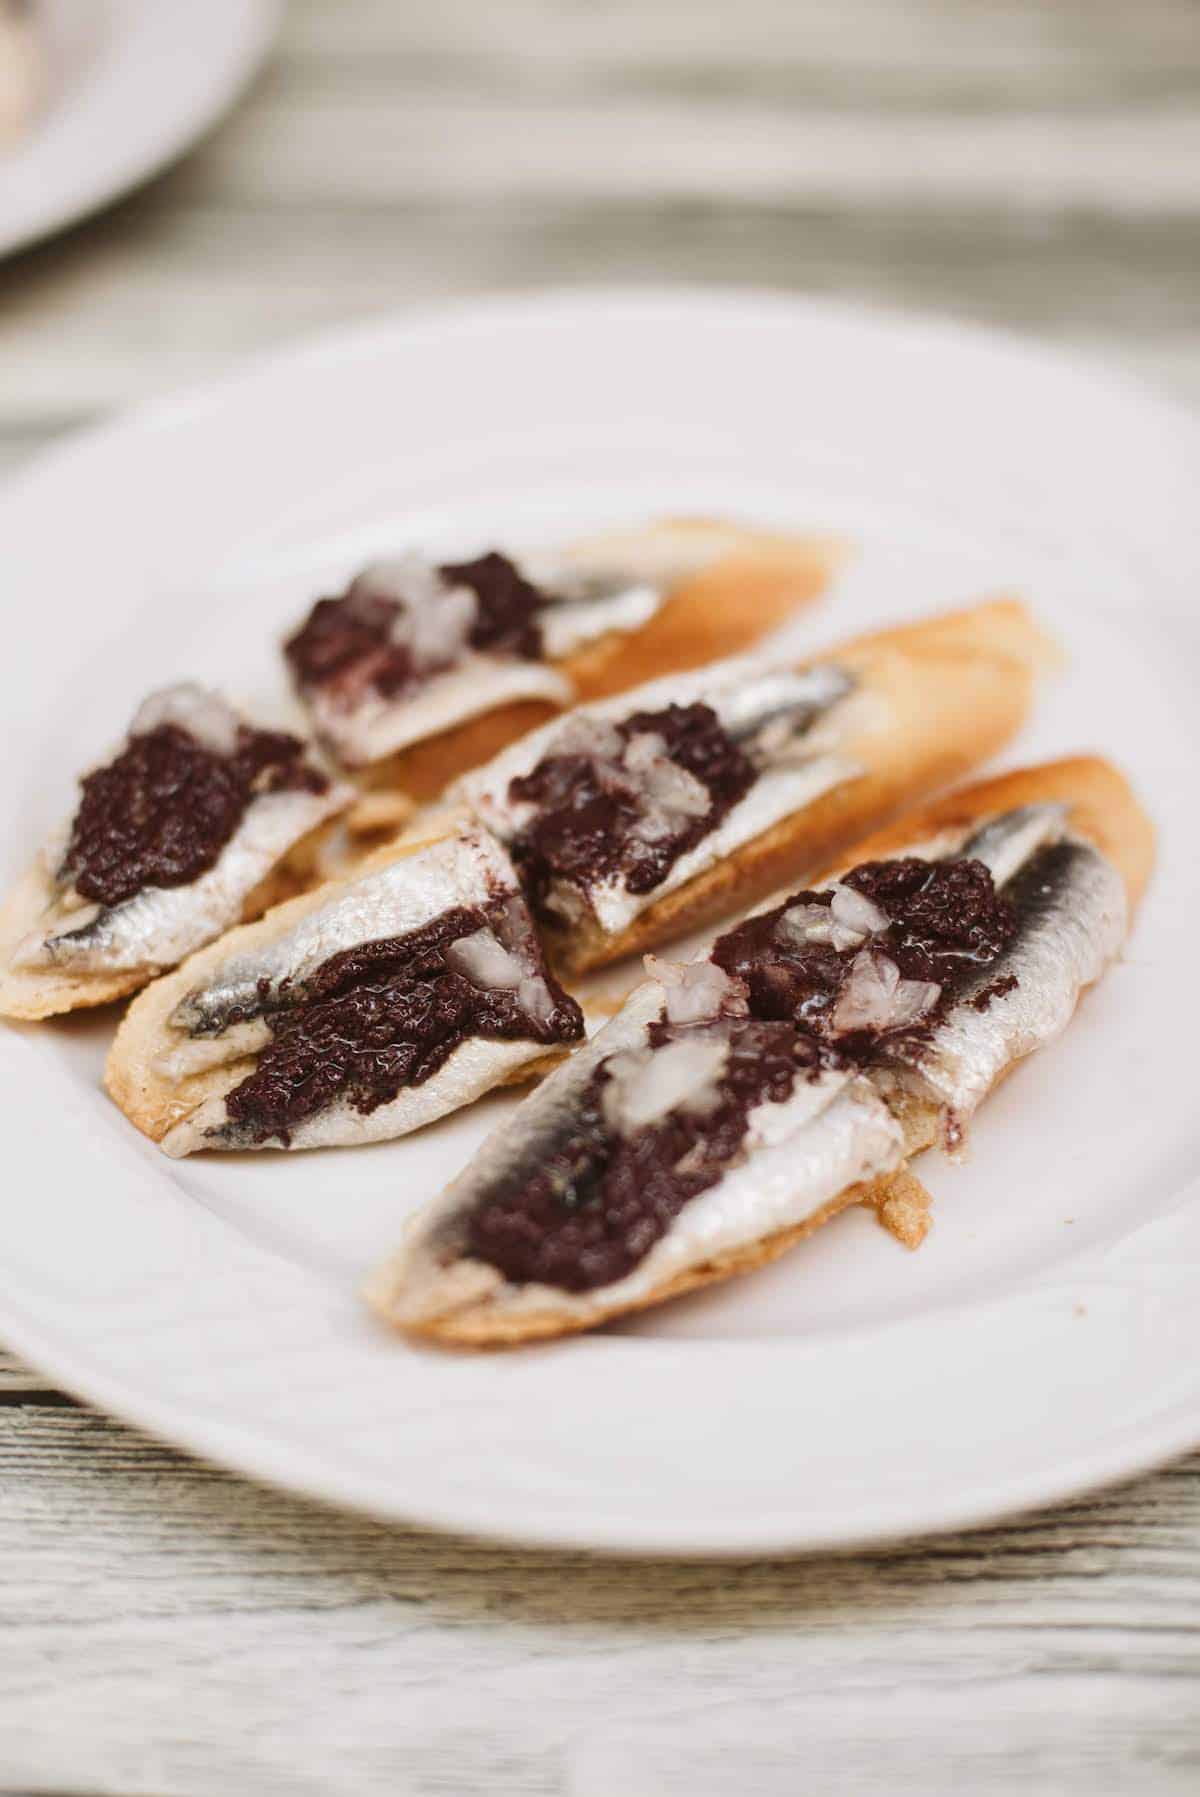 Plate of anchovies with black olive tapenade atop small slices of bread.